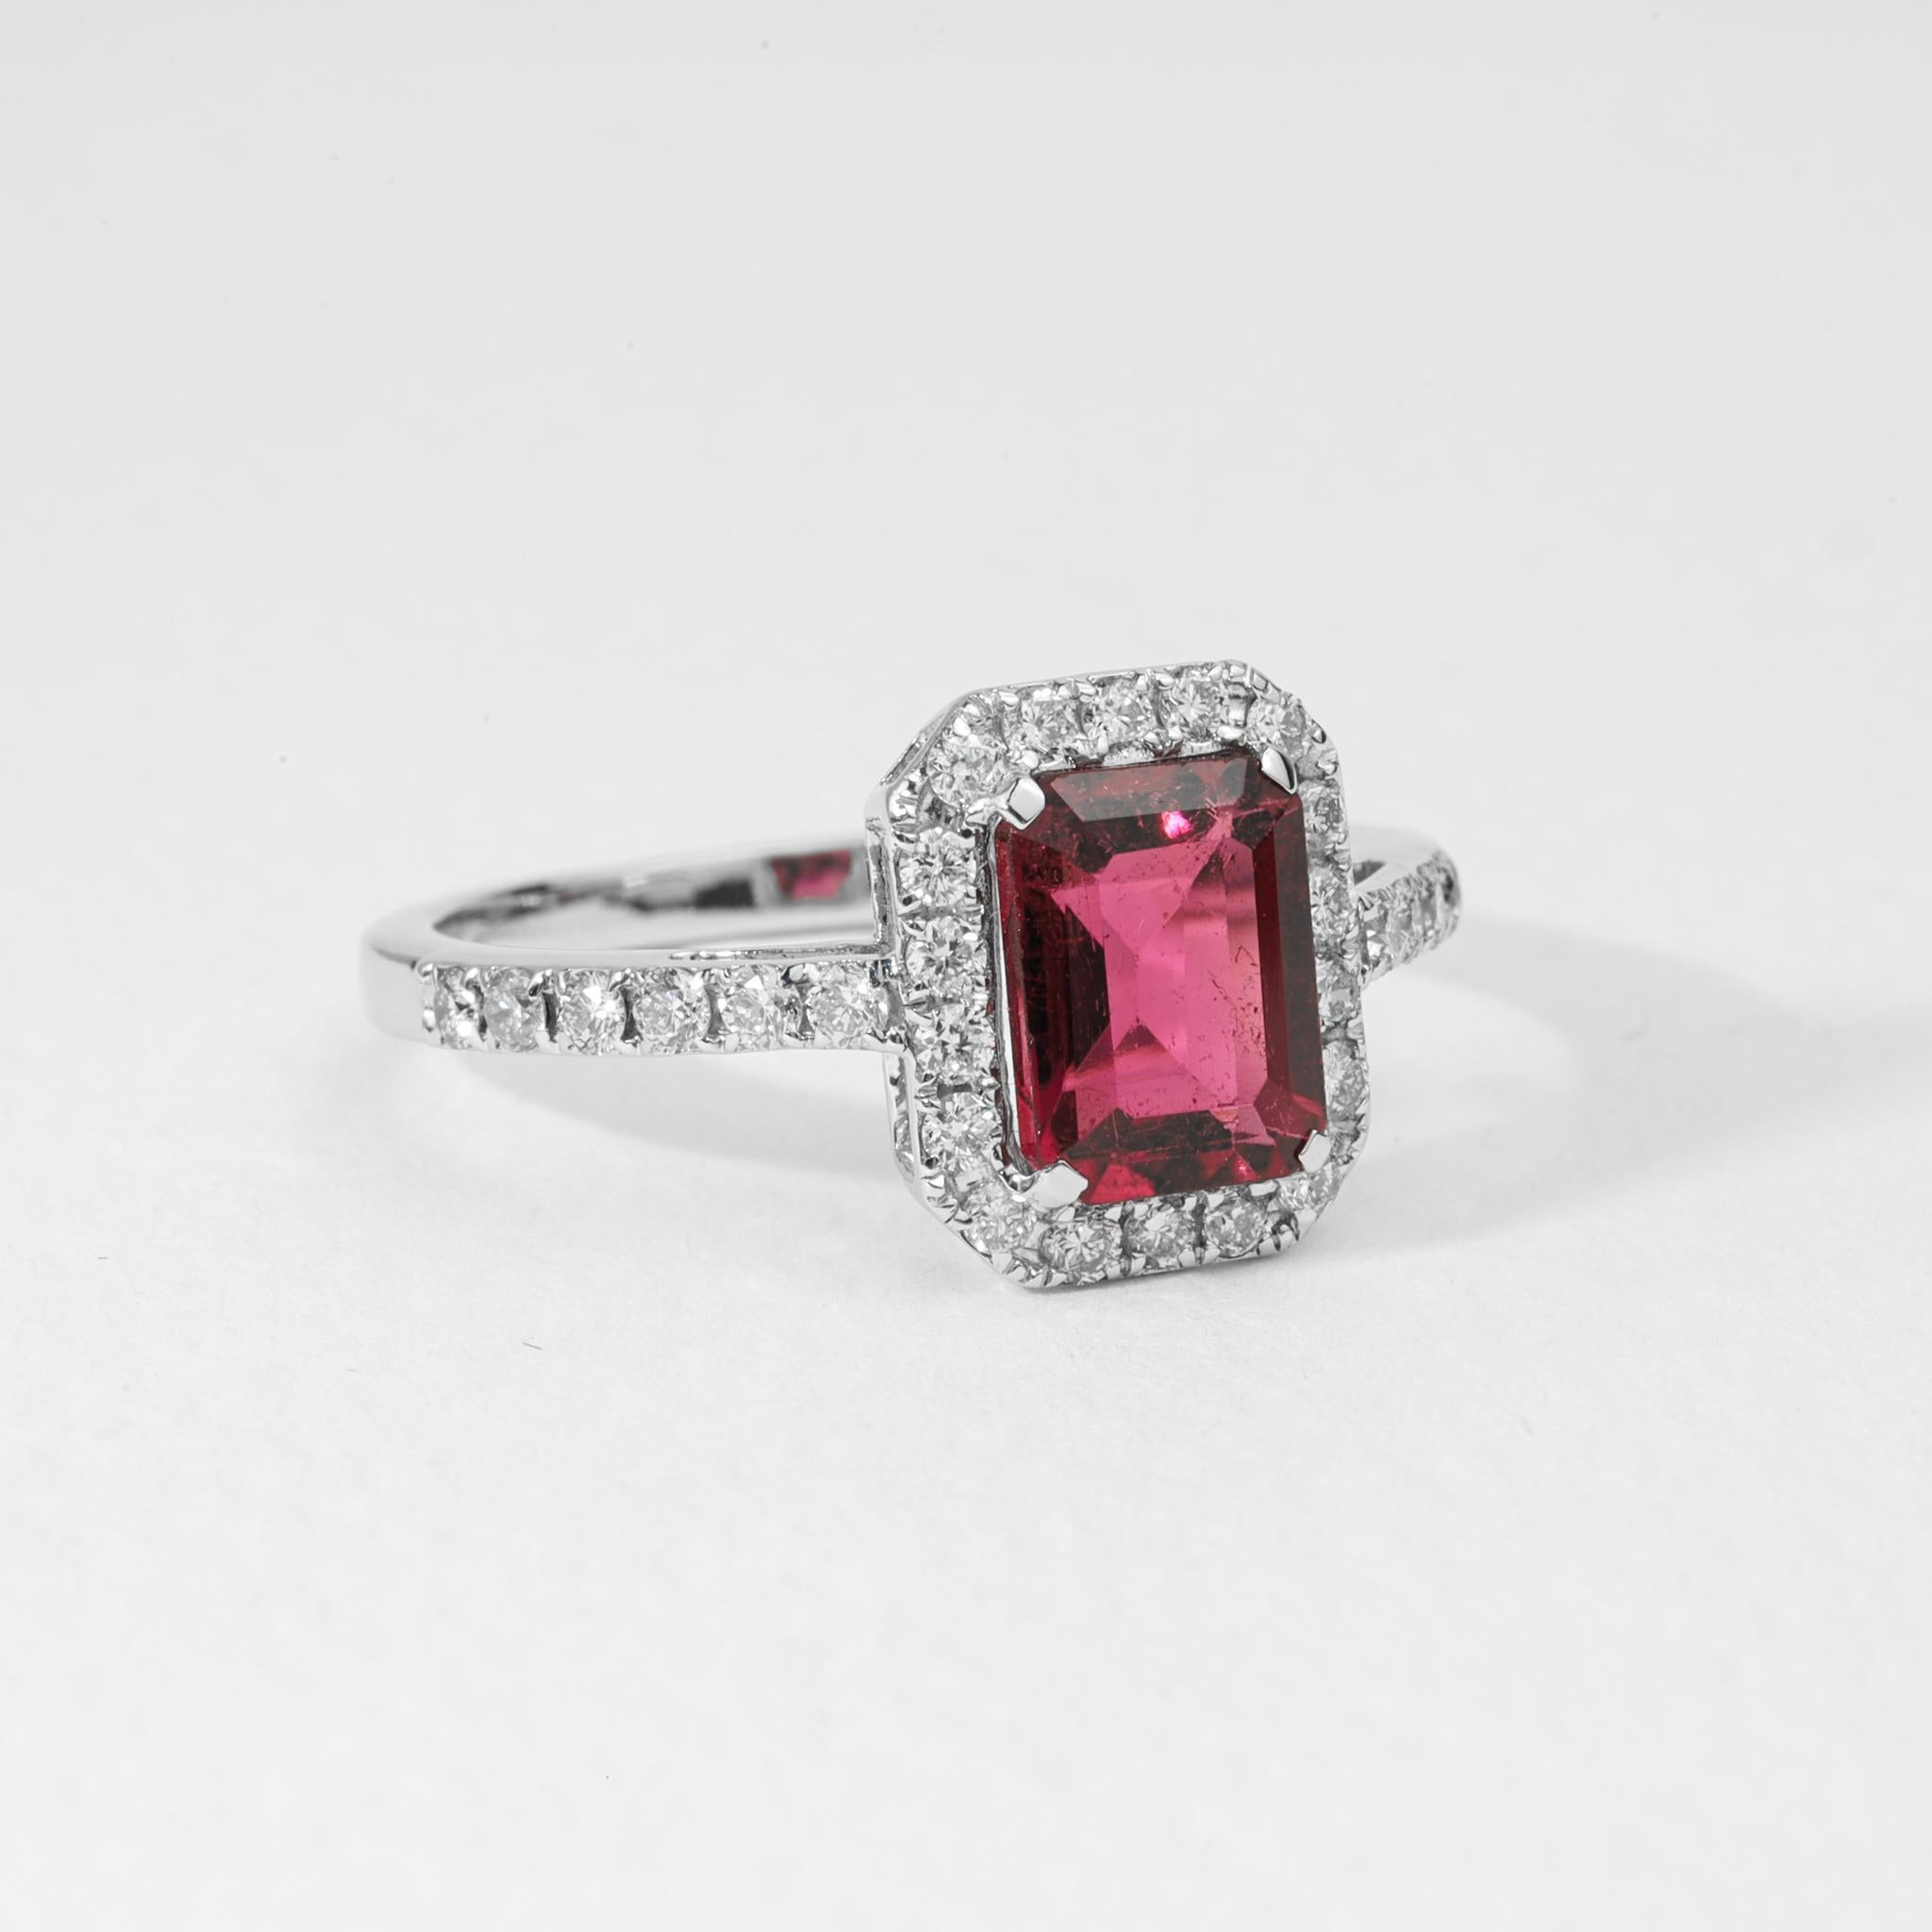 Emerald Cut 1.5 Carat Rubellite Tourmaline with 0.5Ct Diamonds Cocktail Ring 18k White For Sale